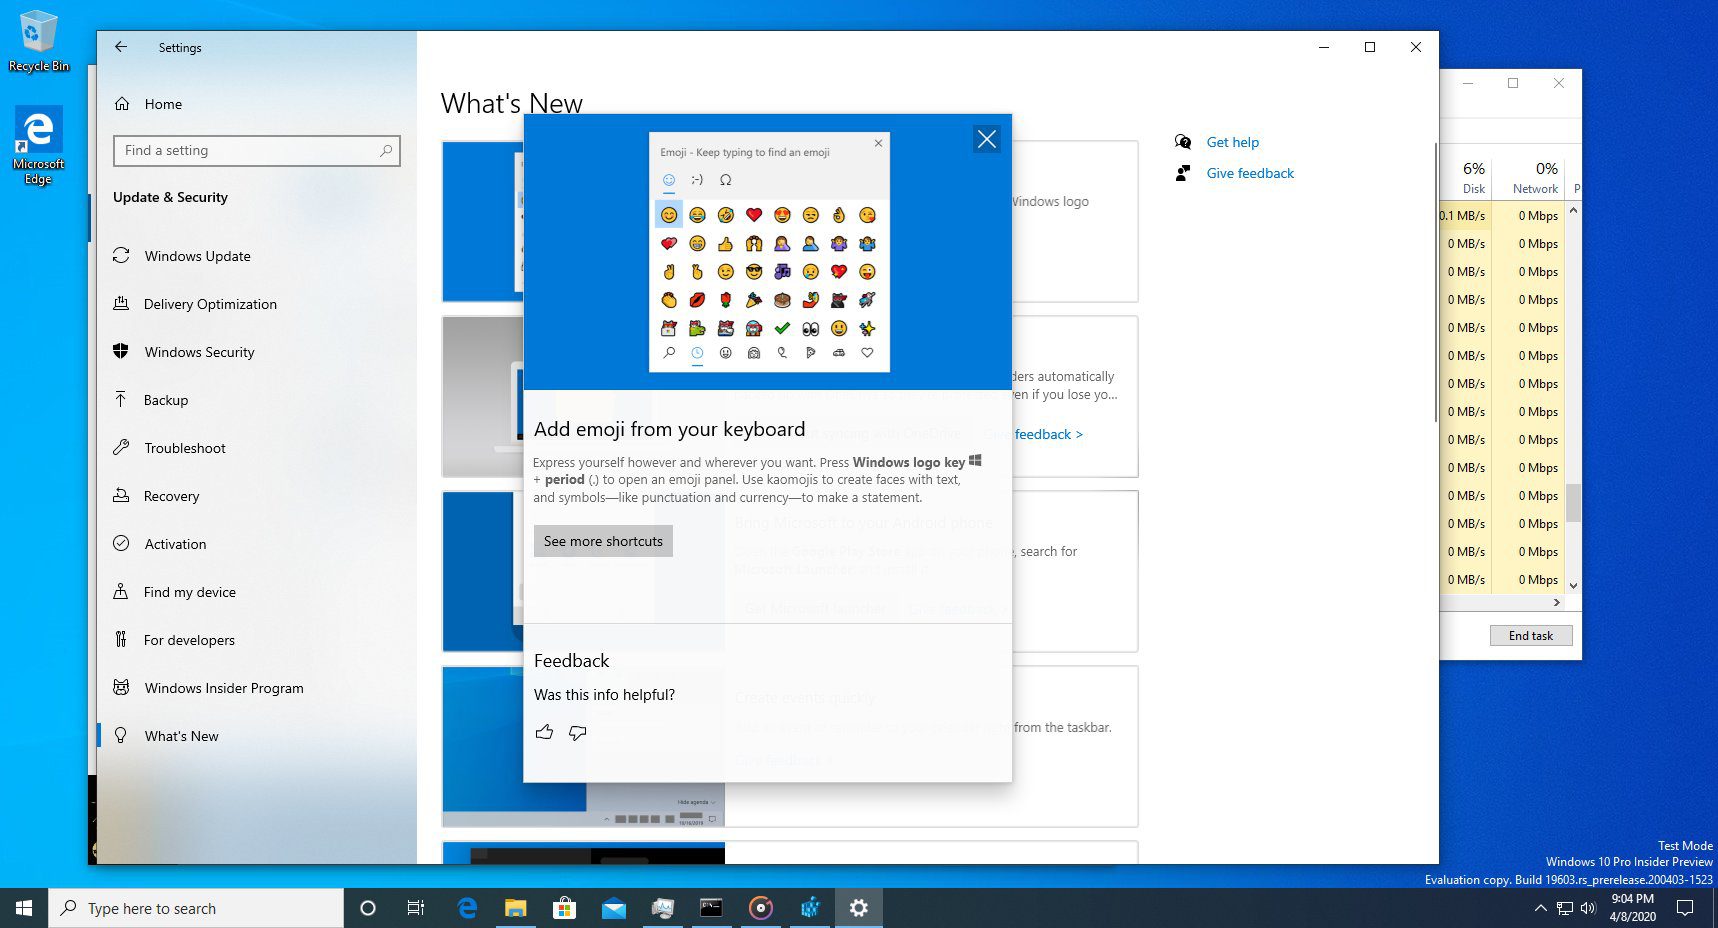 Microsoft is adding a great 'What's New' section to Windows 10 Settings 2